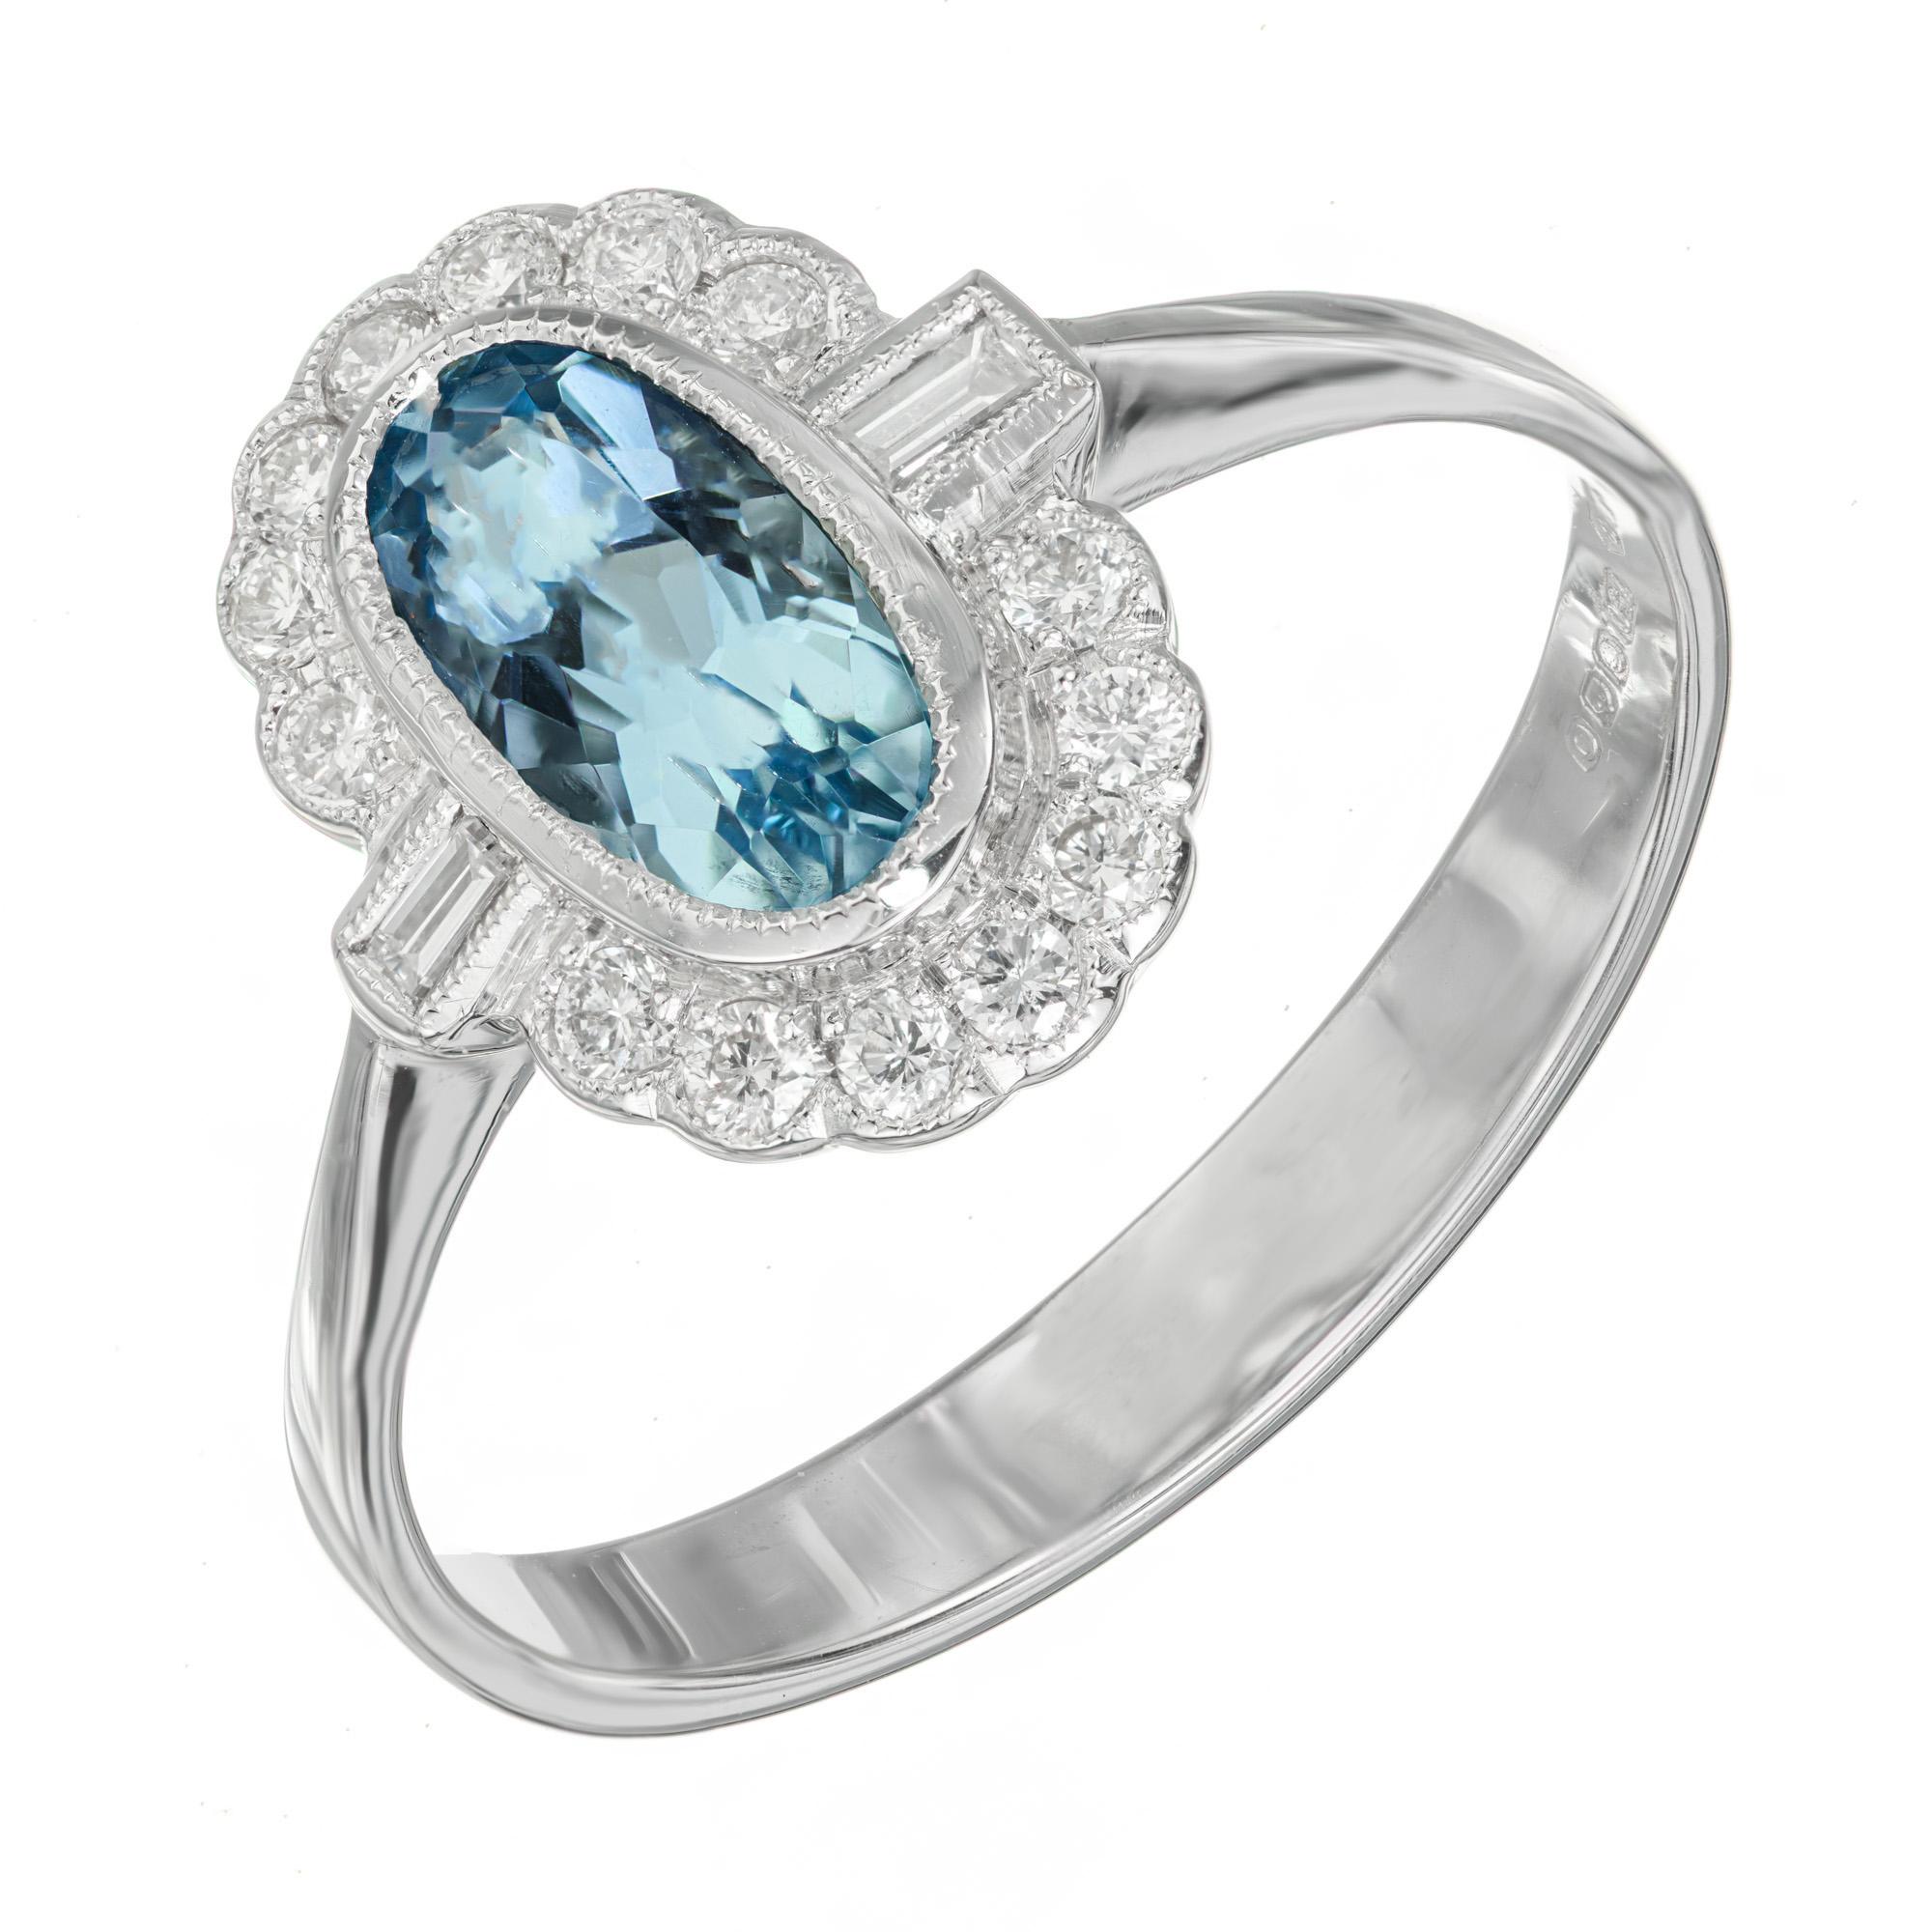 1950's Aqua and diamond ring. Oval aqua center stone with a halo of round diamonds with 2 baguette accent diamonds set in an 18k white gold setting. 

1 oval blue aquamarine, VS approx. 1.00ct
14 round diamonds, H-I VS SI approx. .17cts
2 straight